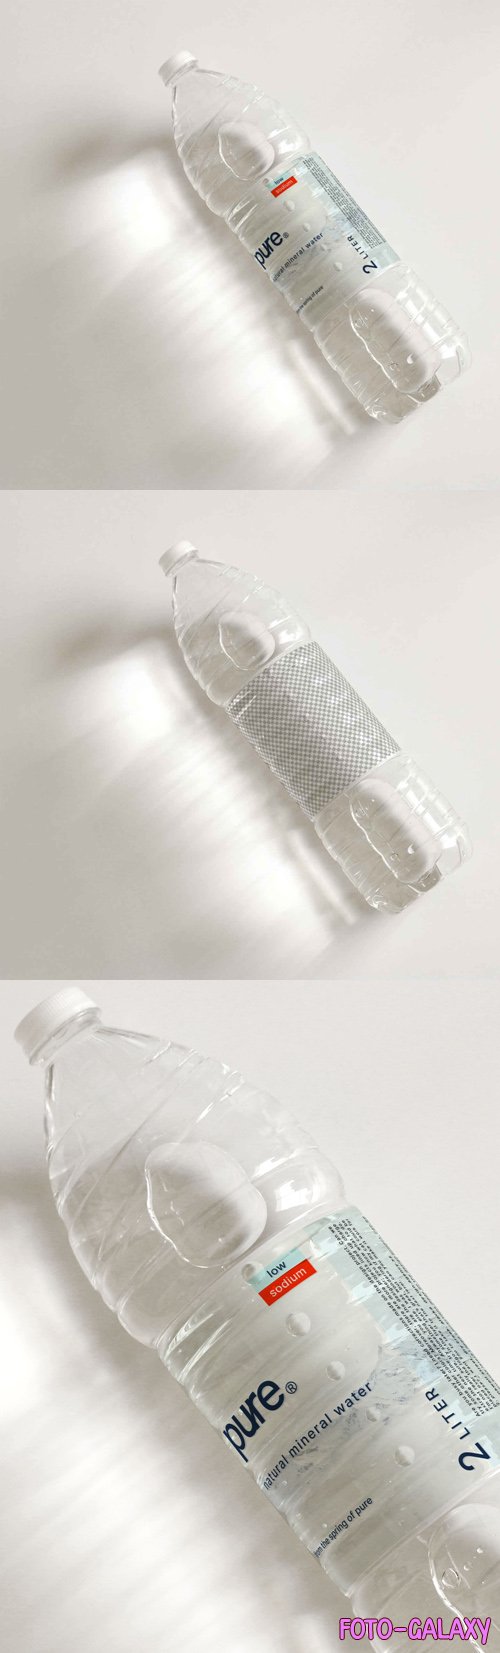 Plastic Water Bottle + Shadows & Light Reflections - PSD Mockup Template